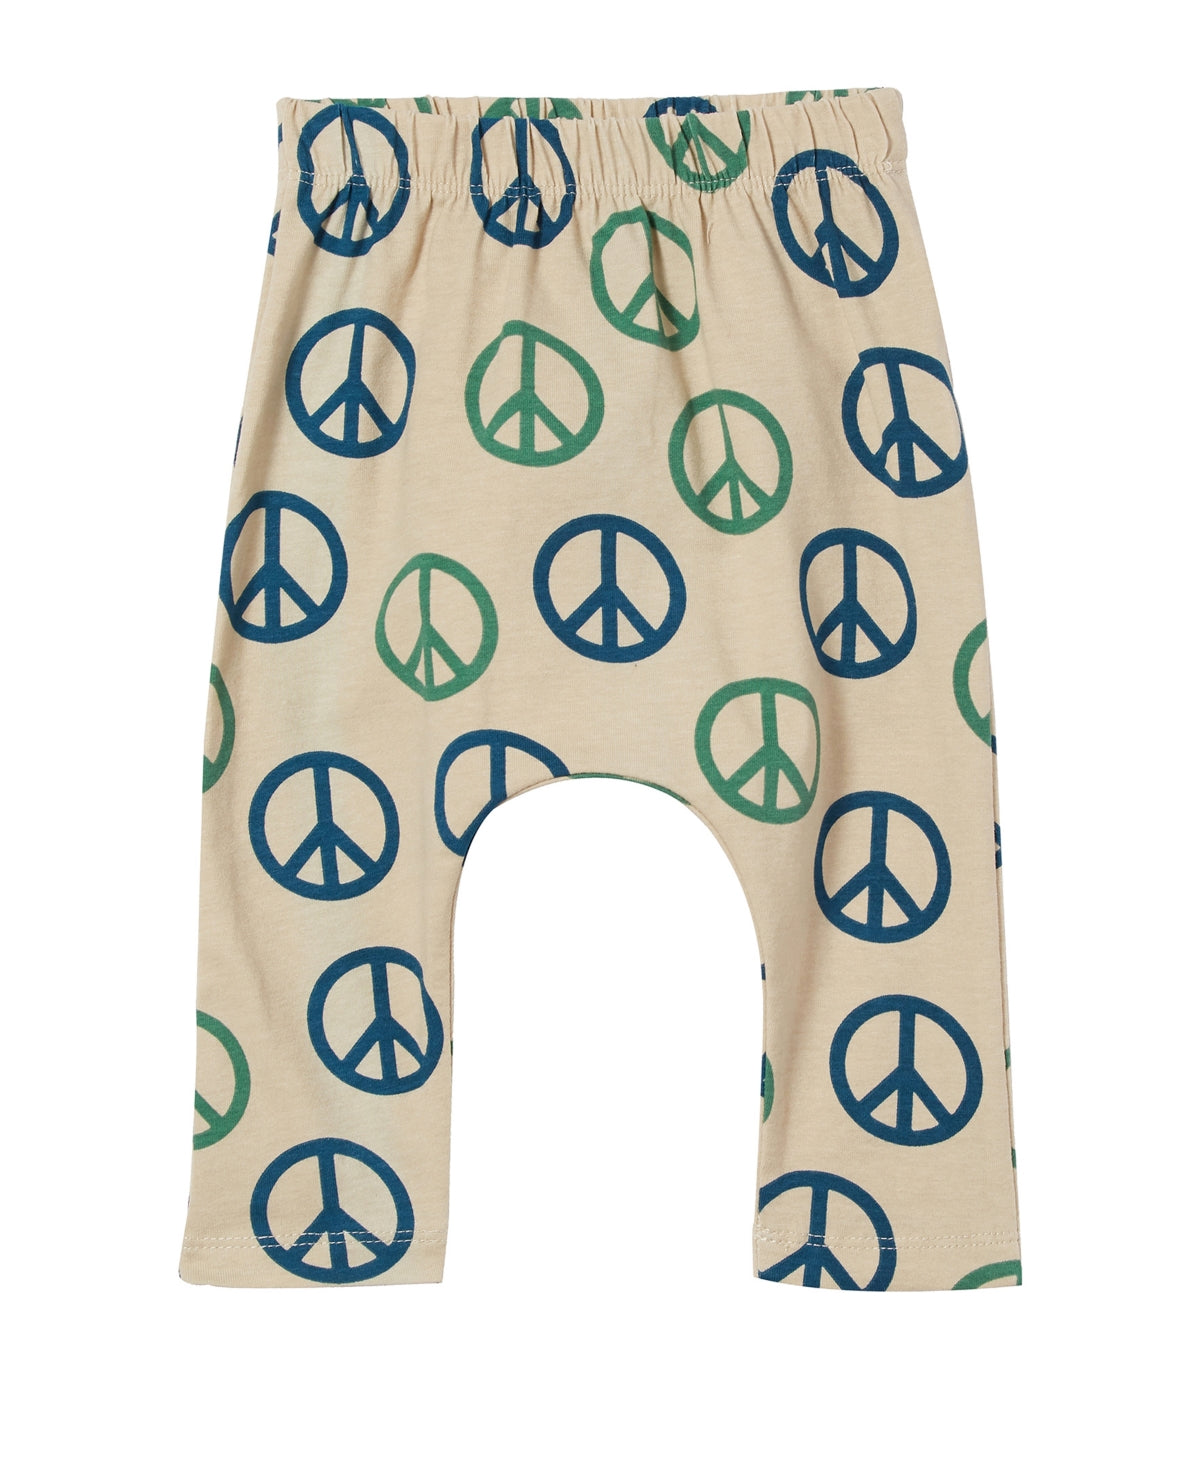 COTTON ON Baby Boys The Leggings Rainy Day, Peace Signs 6-12 months